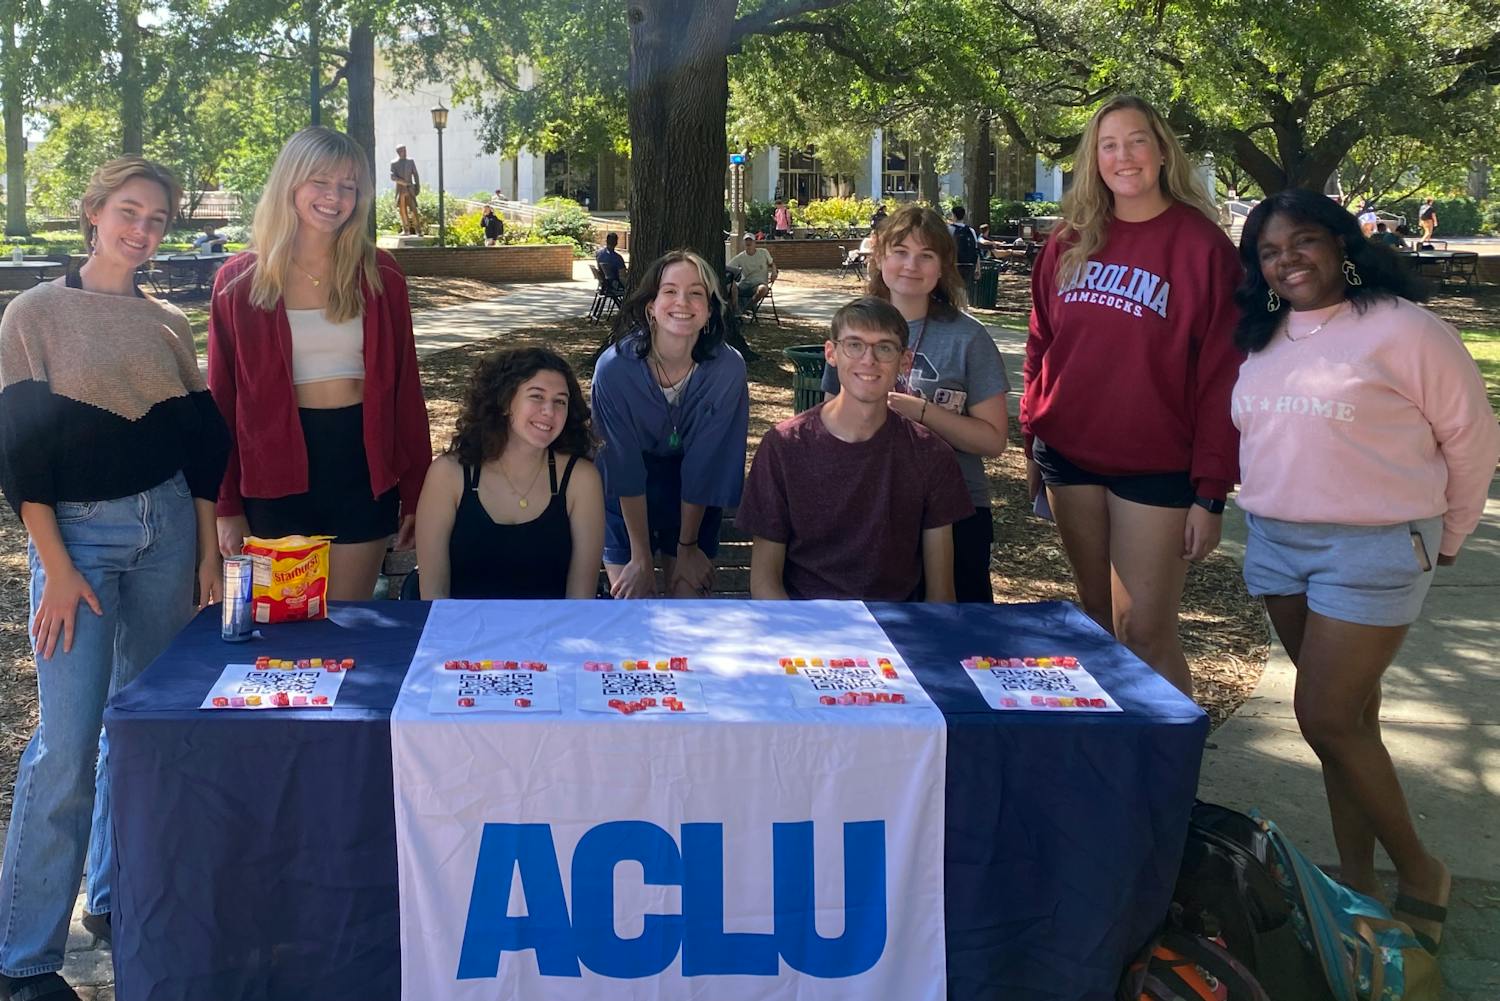 Members of the ɫɫƵ chapter of the ACLU, including Grace Thomas, the president, host the ACLU voter drive on Sept. 27, 2022 at the Clapping Circle at ɫɫƵ's Columbia Campus. ɫɫƵ's ACLU chapter is just one organization on campus that is working to prepare ɫɫƵs for the upcoming elections.